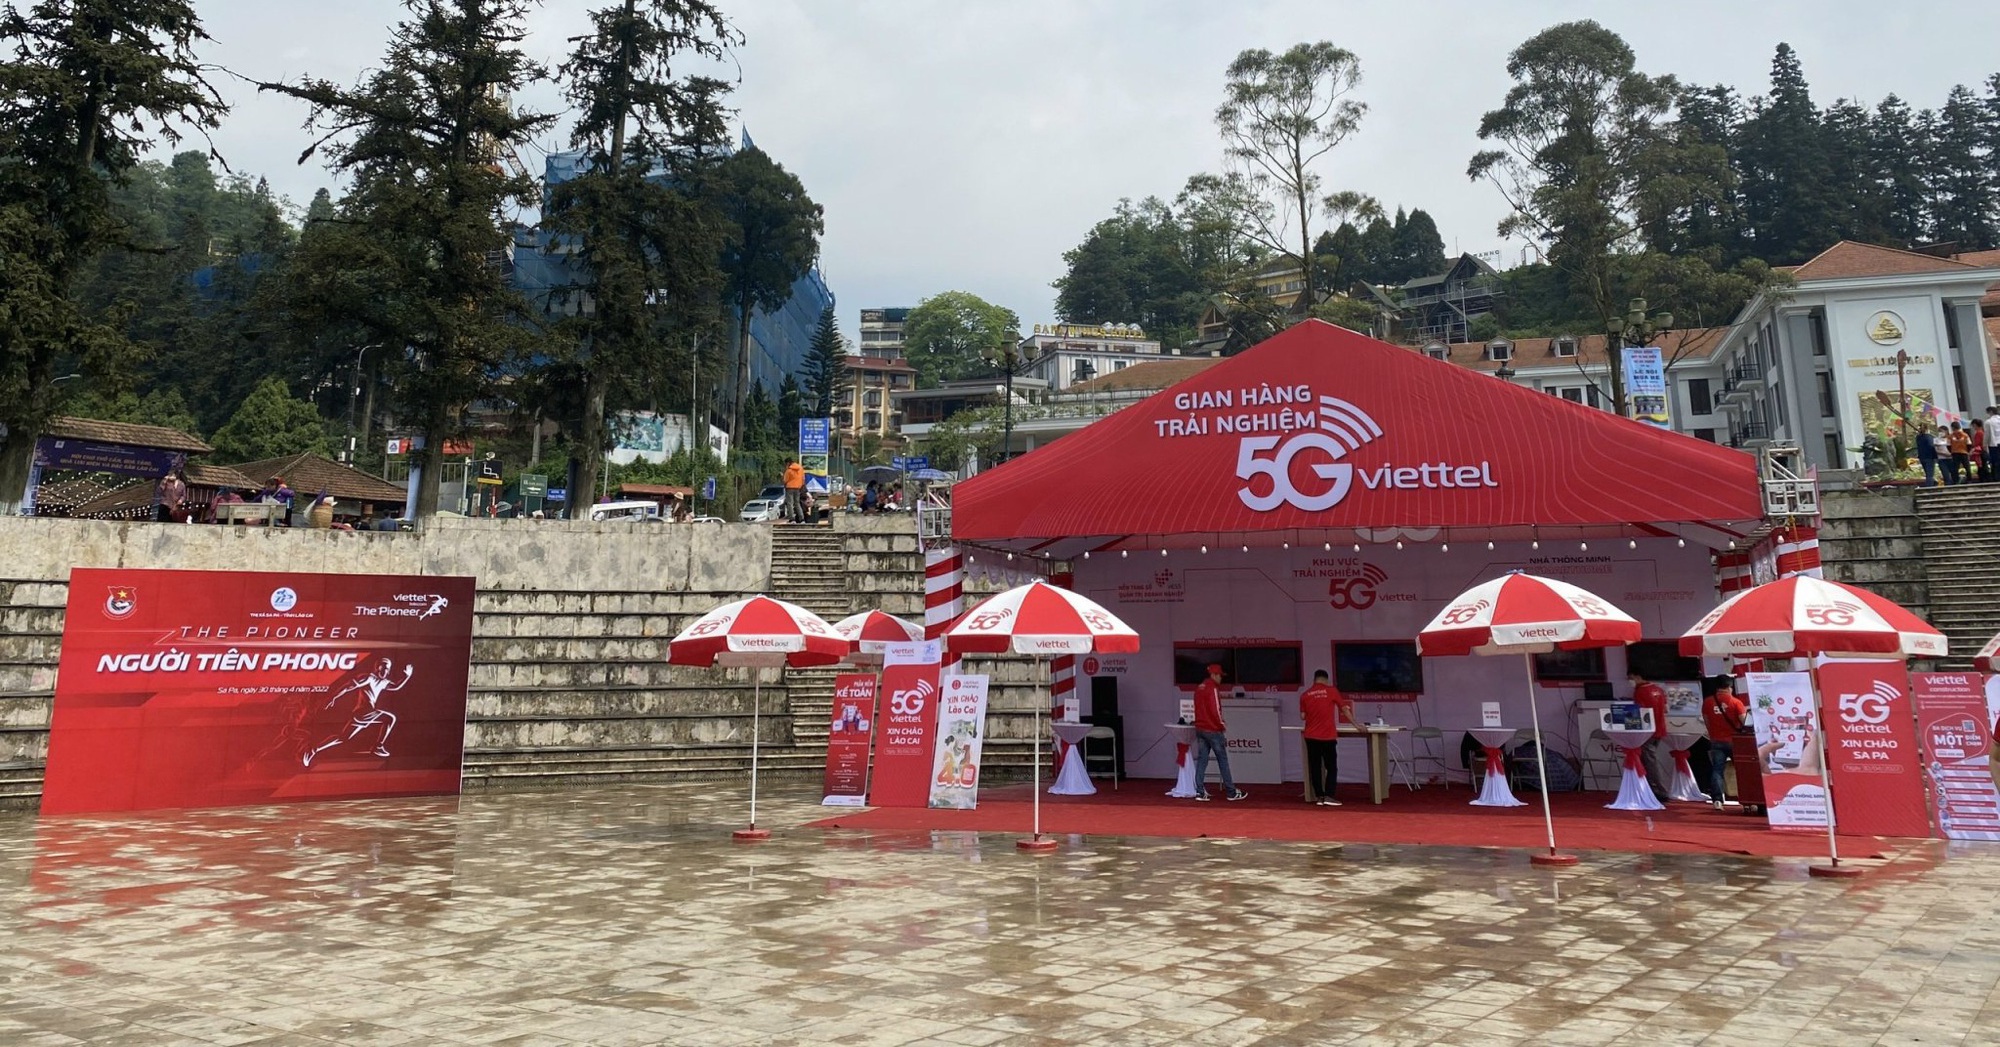 The first operator to broadcast 5G services in Lao Cai